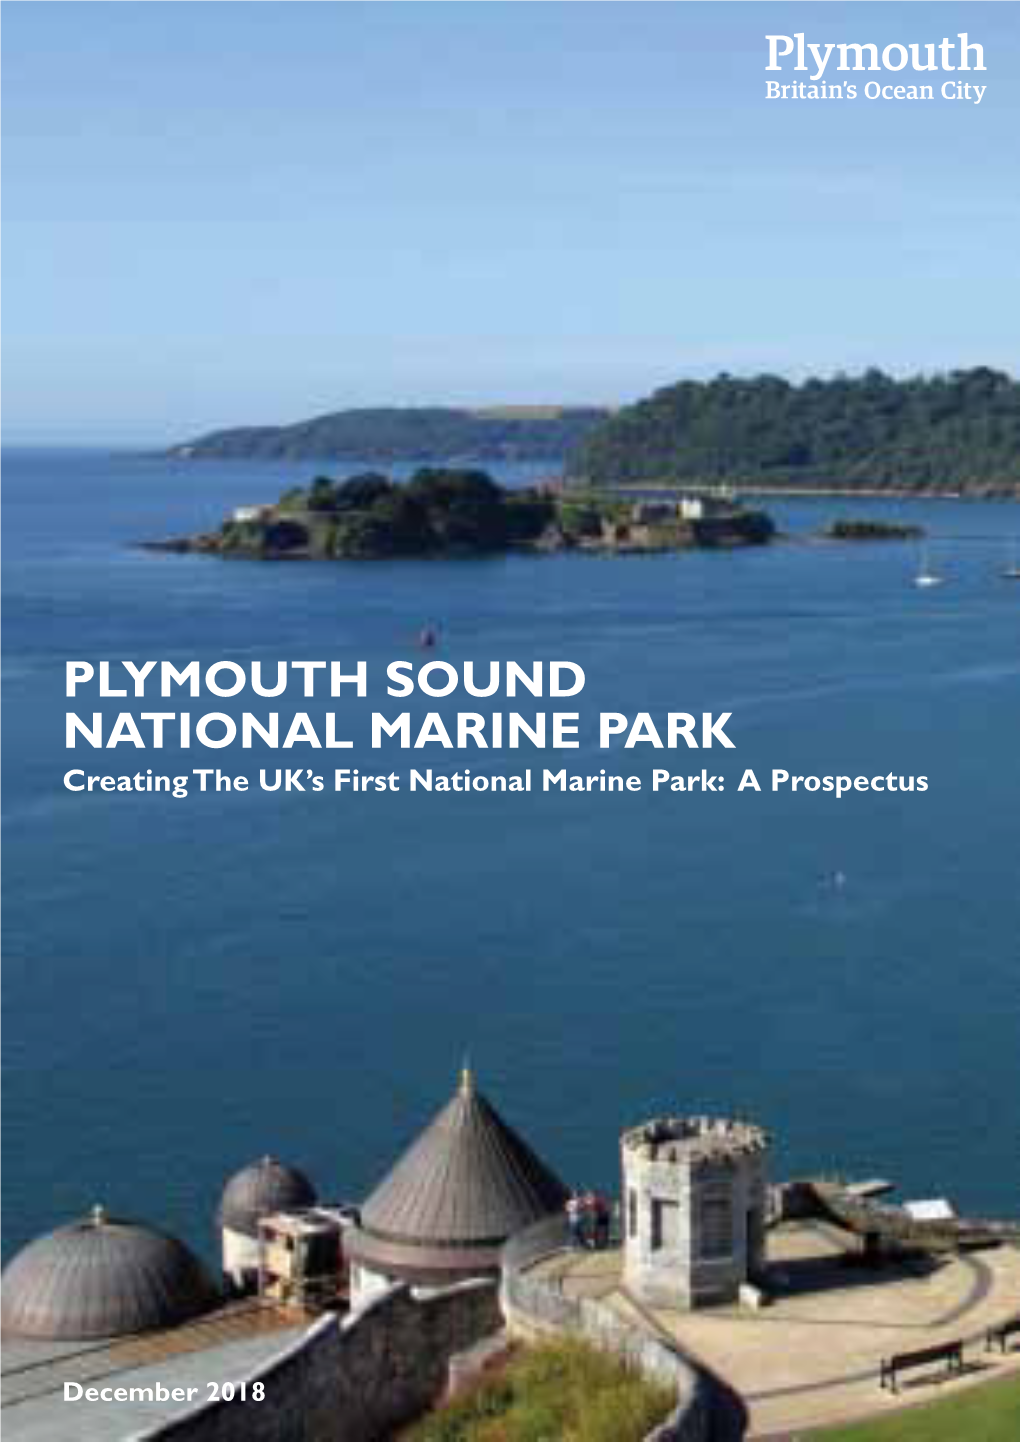 PLYMOUTH SOUND NATIONAL MARINE PARK Creating the UK’S First National Marine Park: a Prospectus